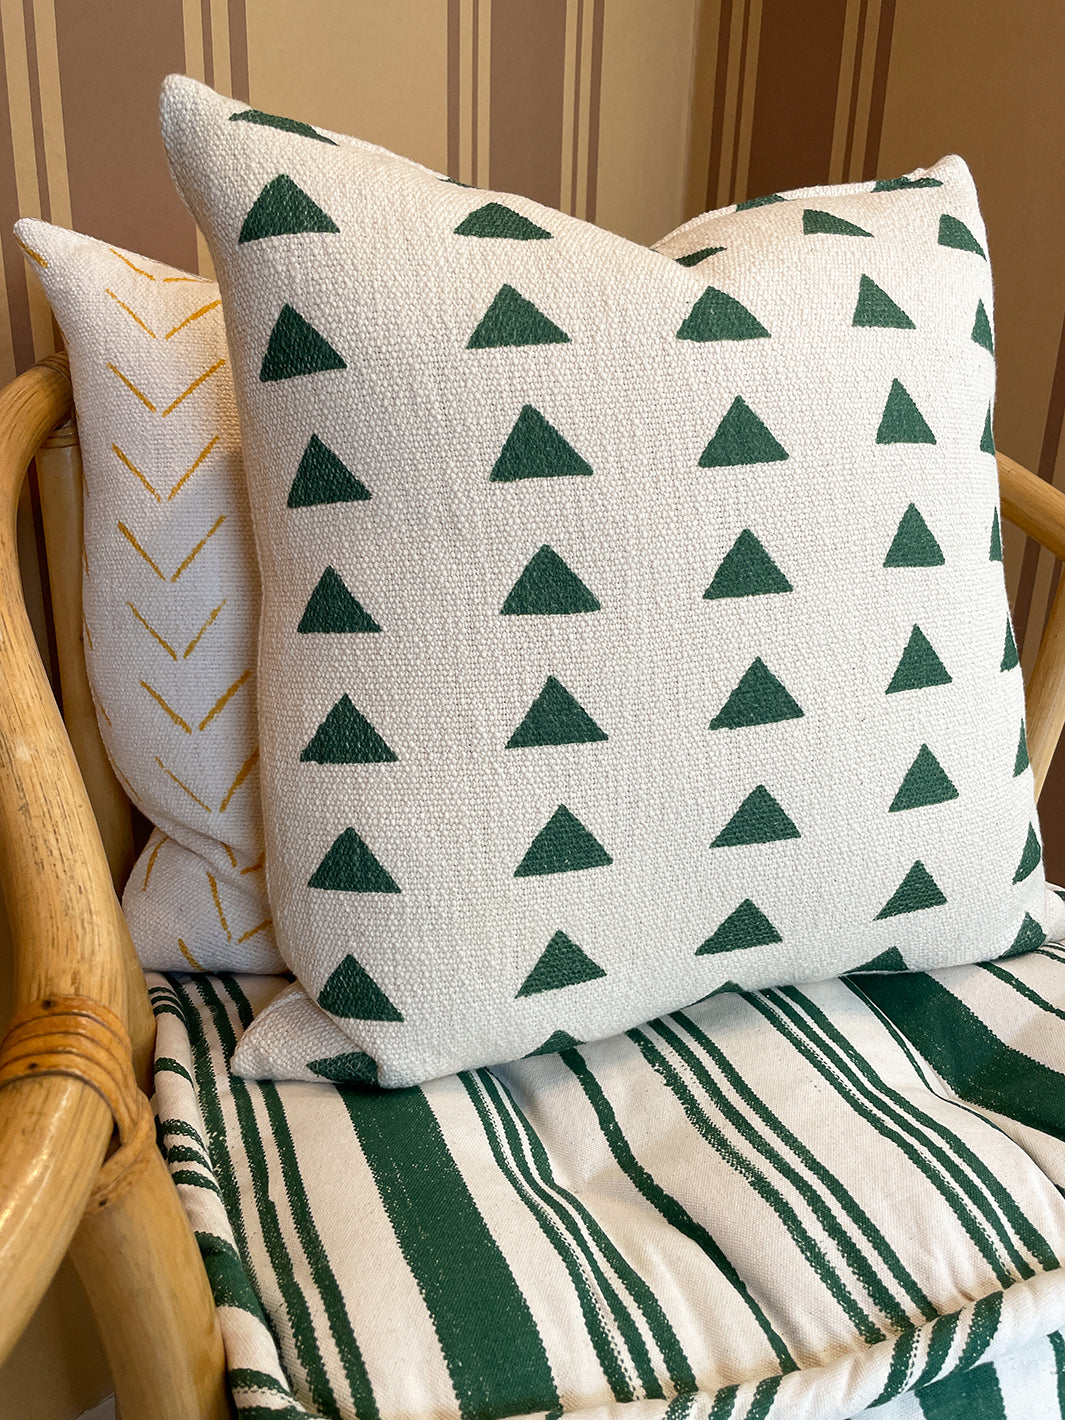 'Fabric by the Yard - Triangles - Green on California Cotton